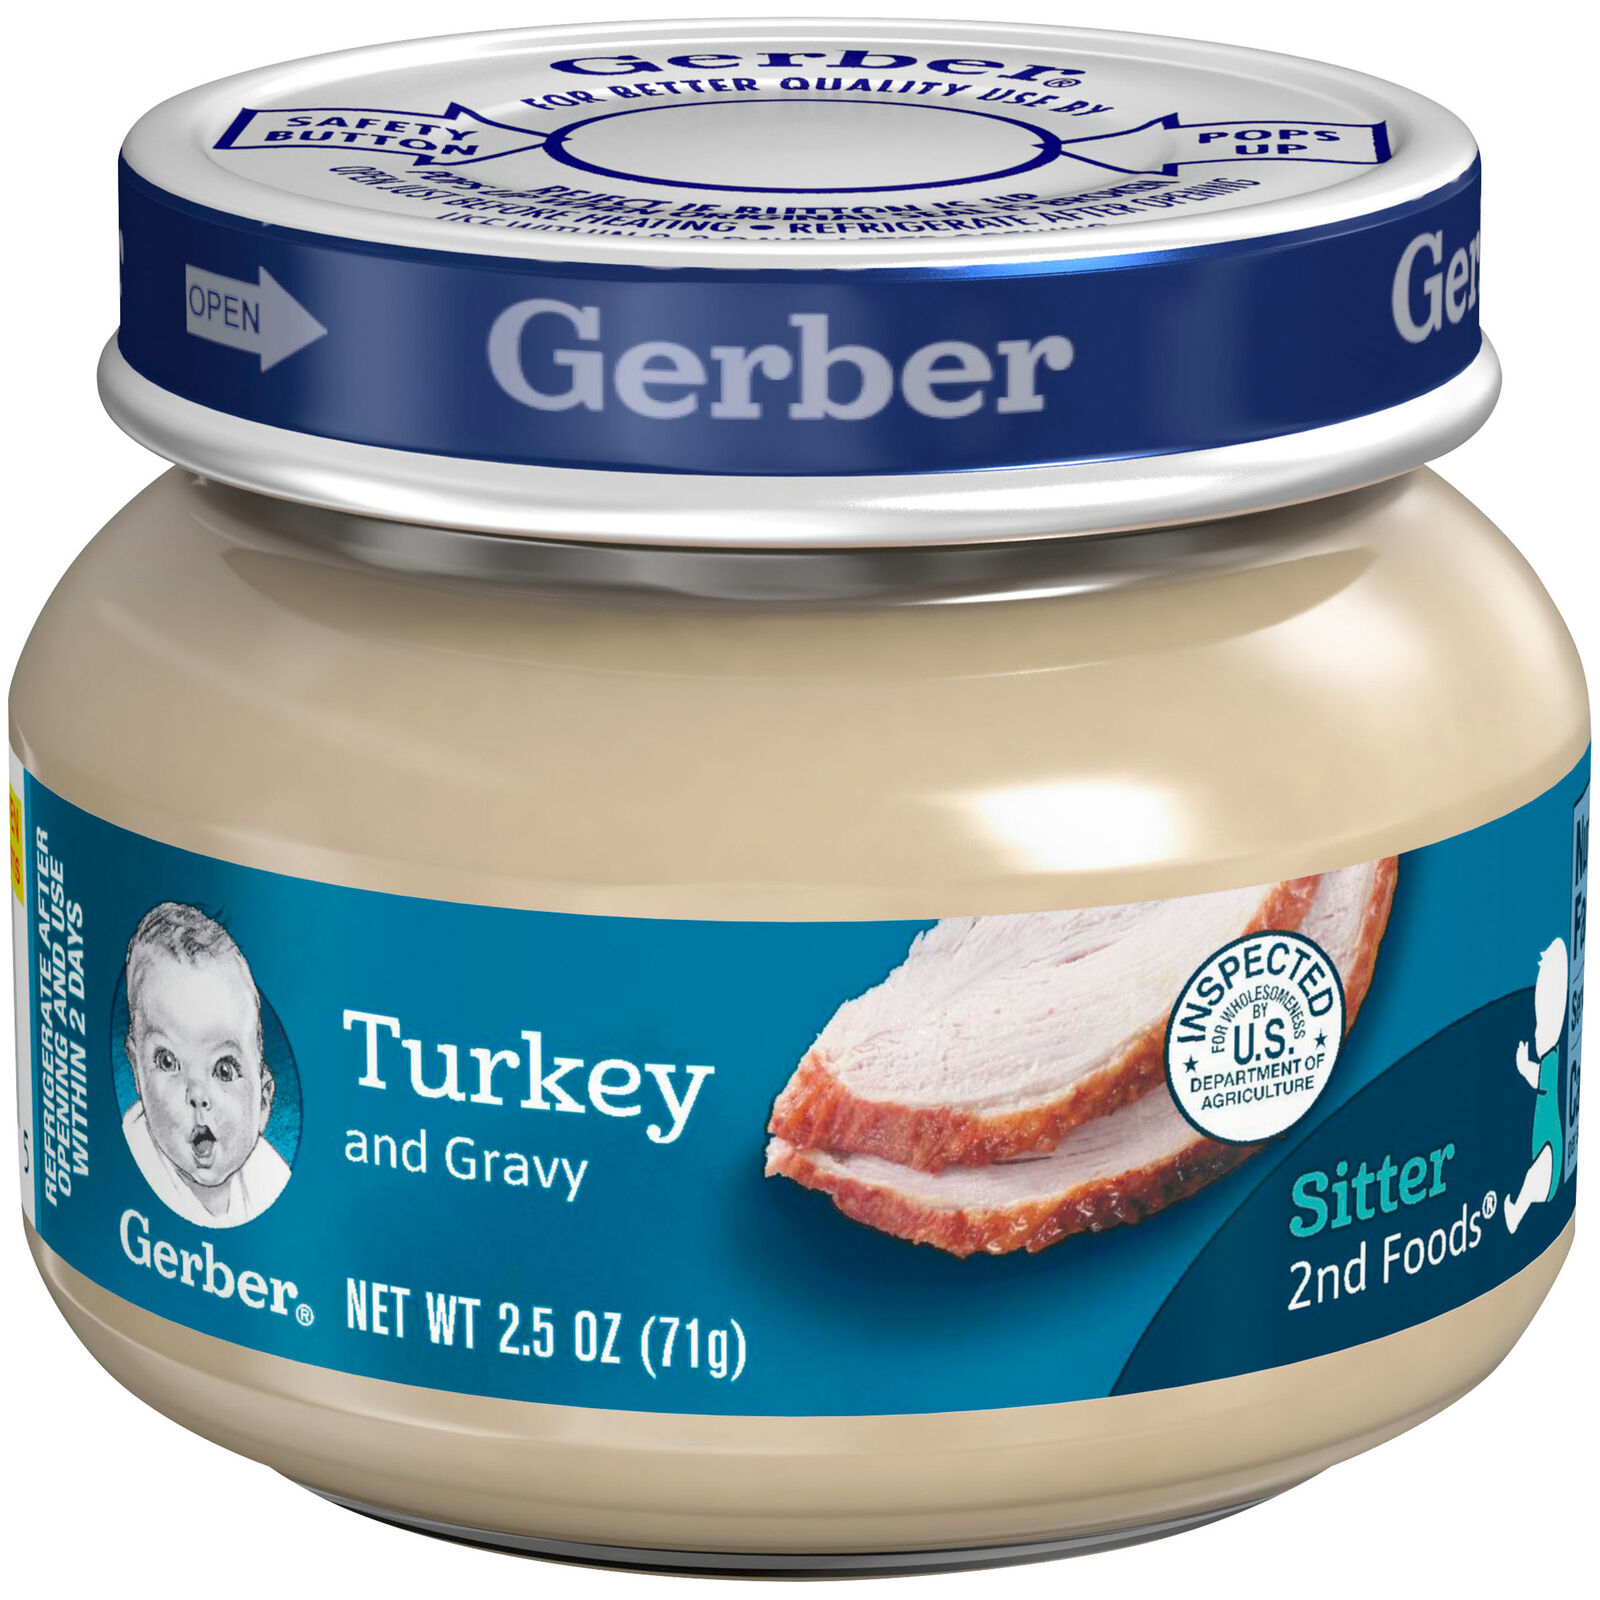 Gerber 2nd Foods Baby Food Jars Turkey and Gravy Non GMO – 2.5 Oz – Pack of 20 Gerber Does not apply